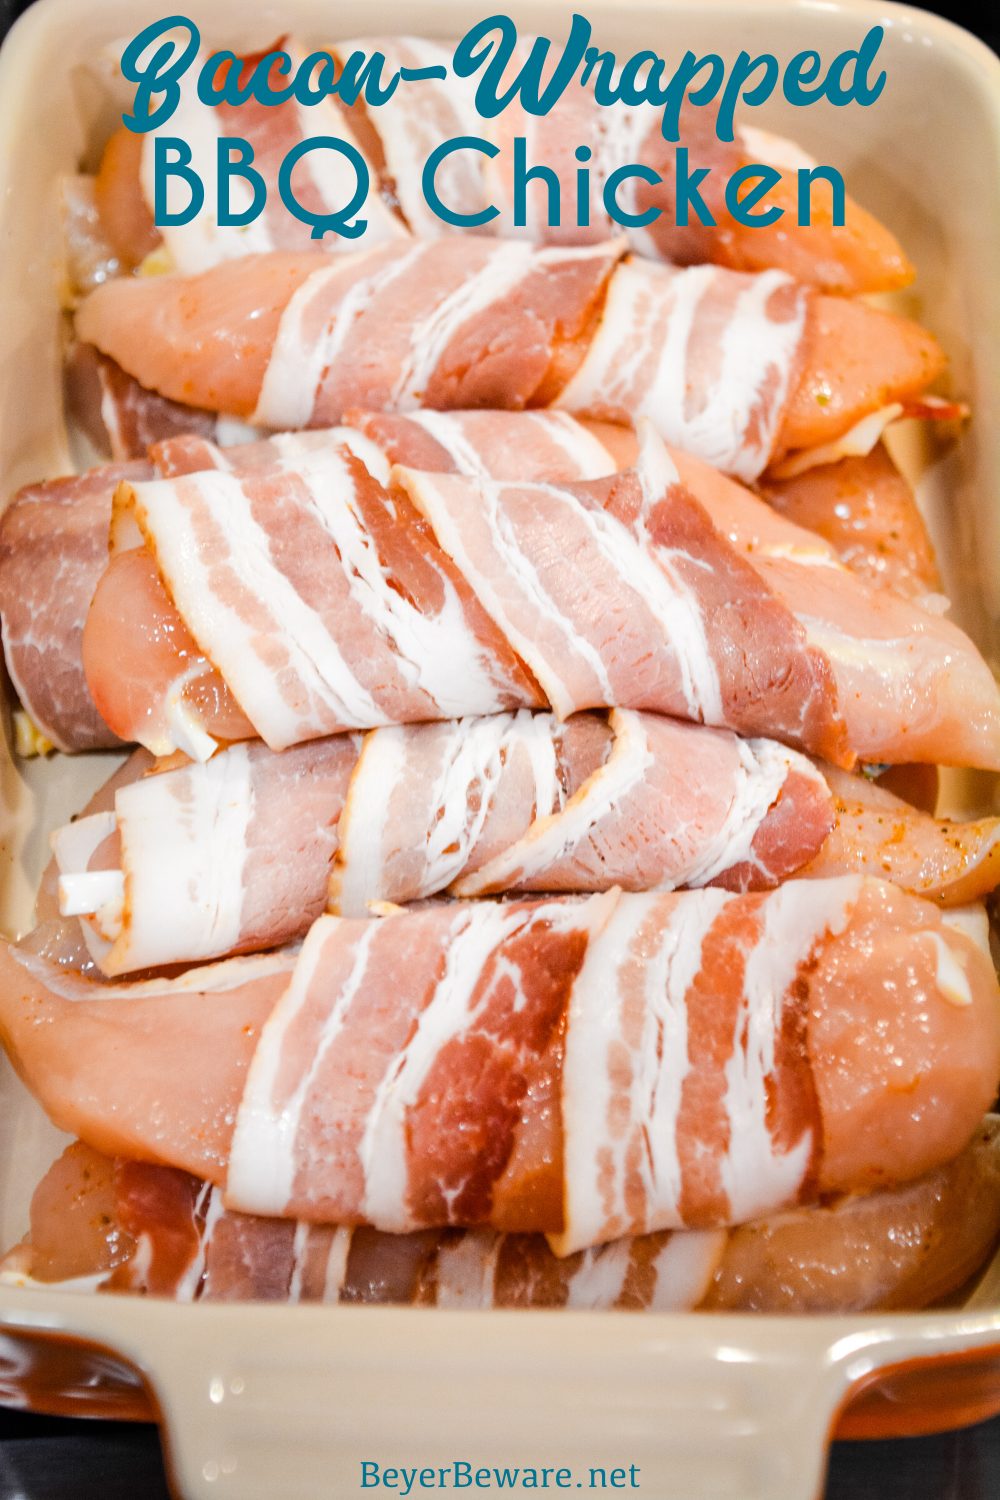 Grilled bacon-wrapped BBQ chicken recipe is lightly seasoned chicken tenderloins that are then wrapped in bacon and then coated in a doctored up barbeque sauce before quickly grilling to perfection.